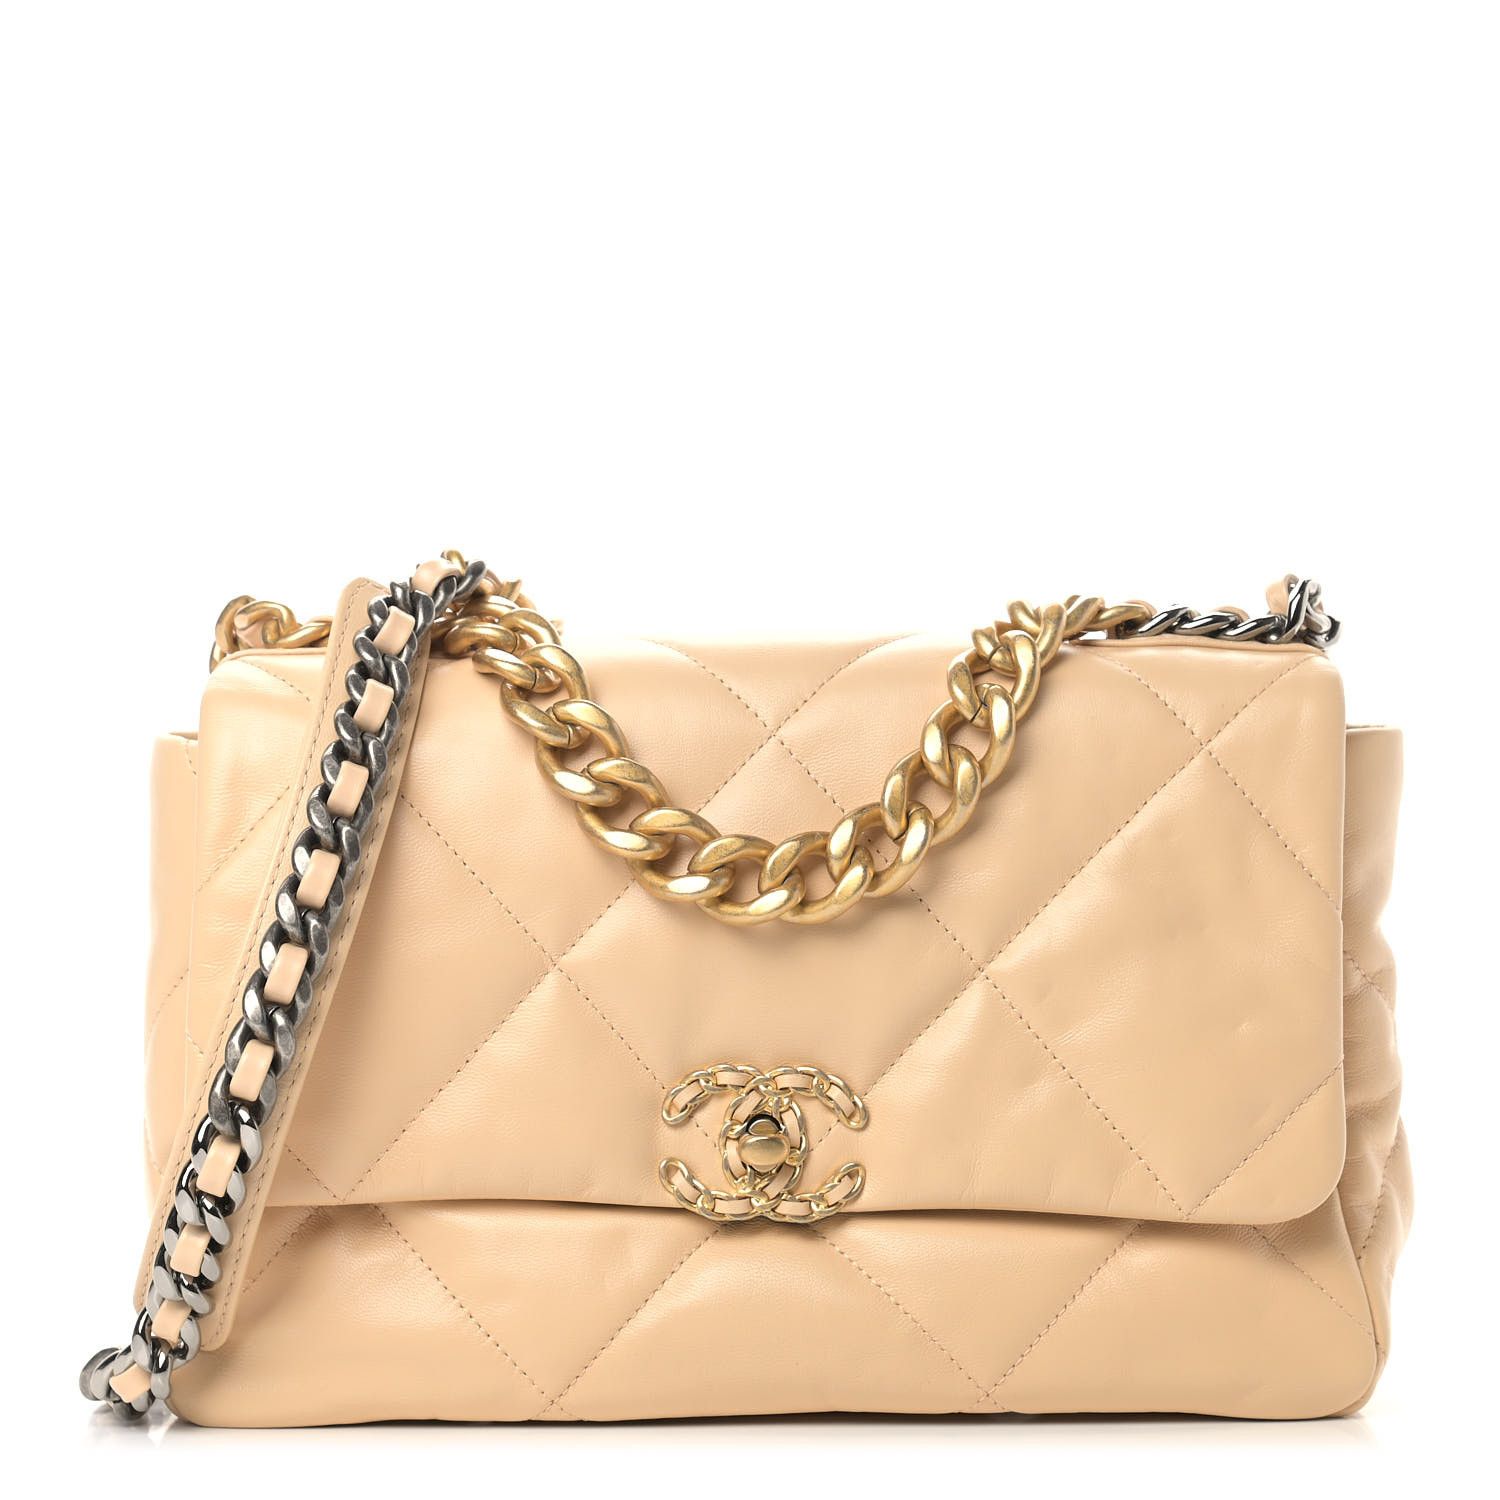 CHANEL

Lambskin Quilted Large Chanel 19 Flap Beige | Fashionphile